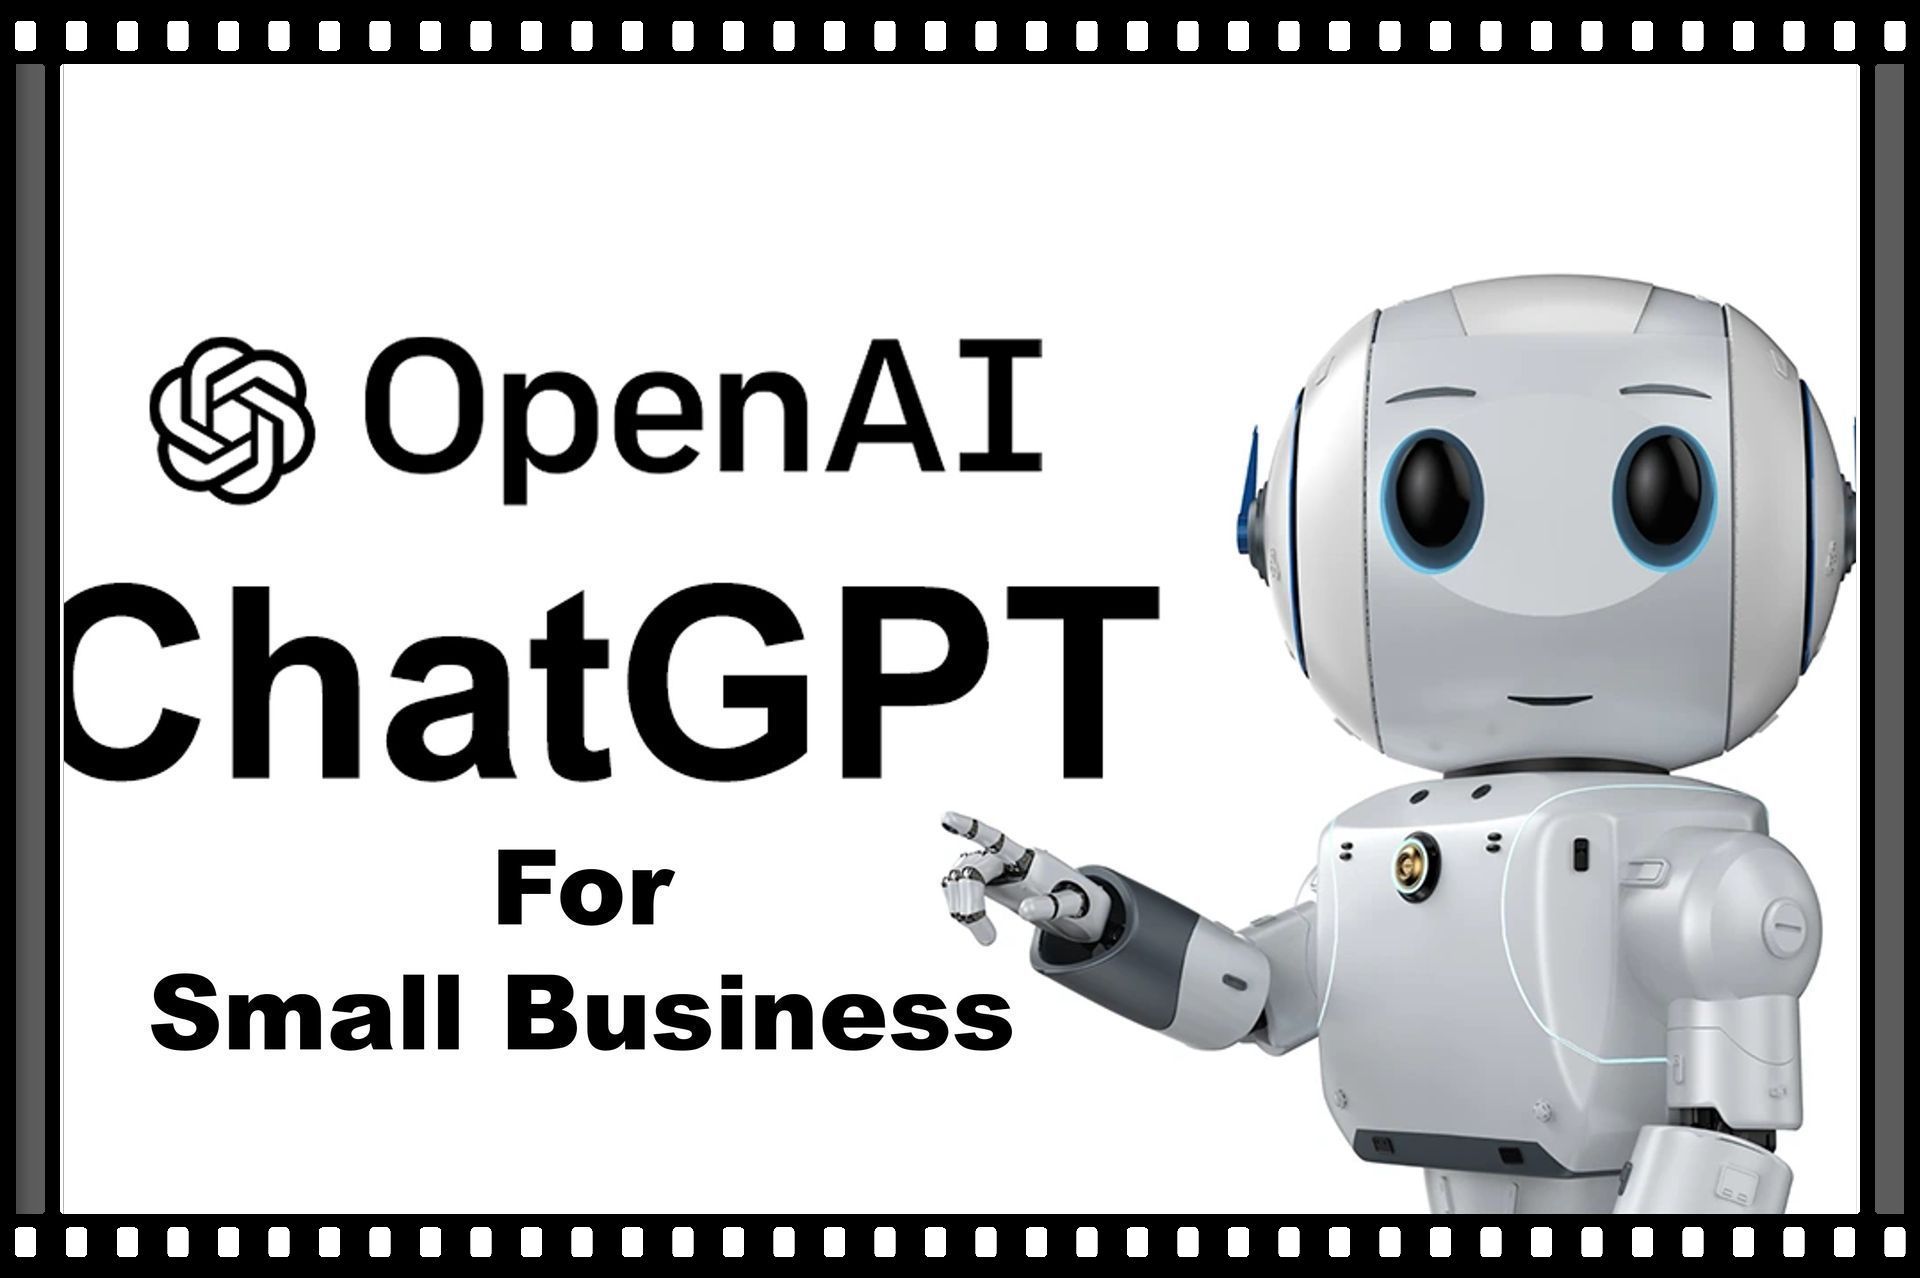 OpenAI Logo and Robot Pointing to ChatGPT word